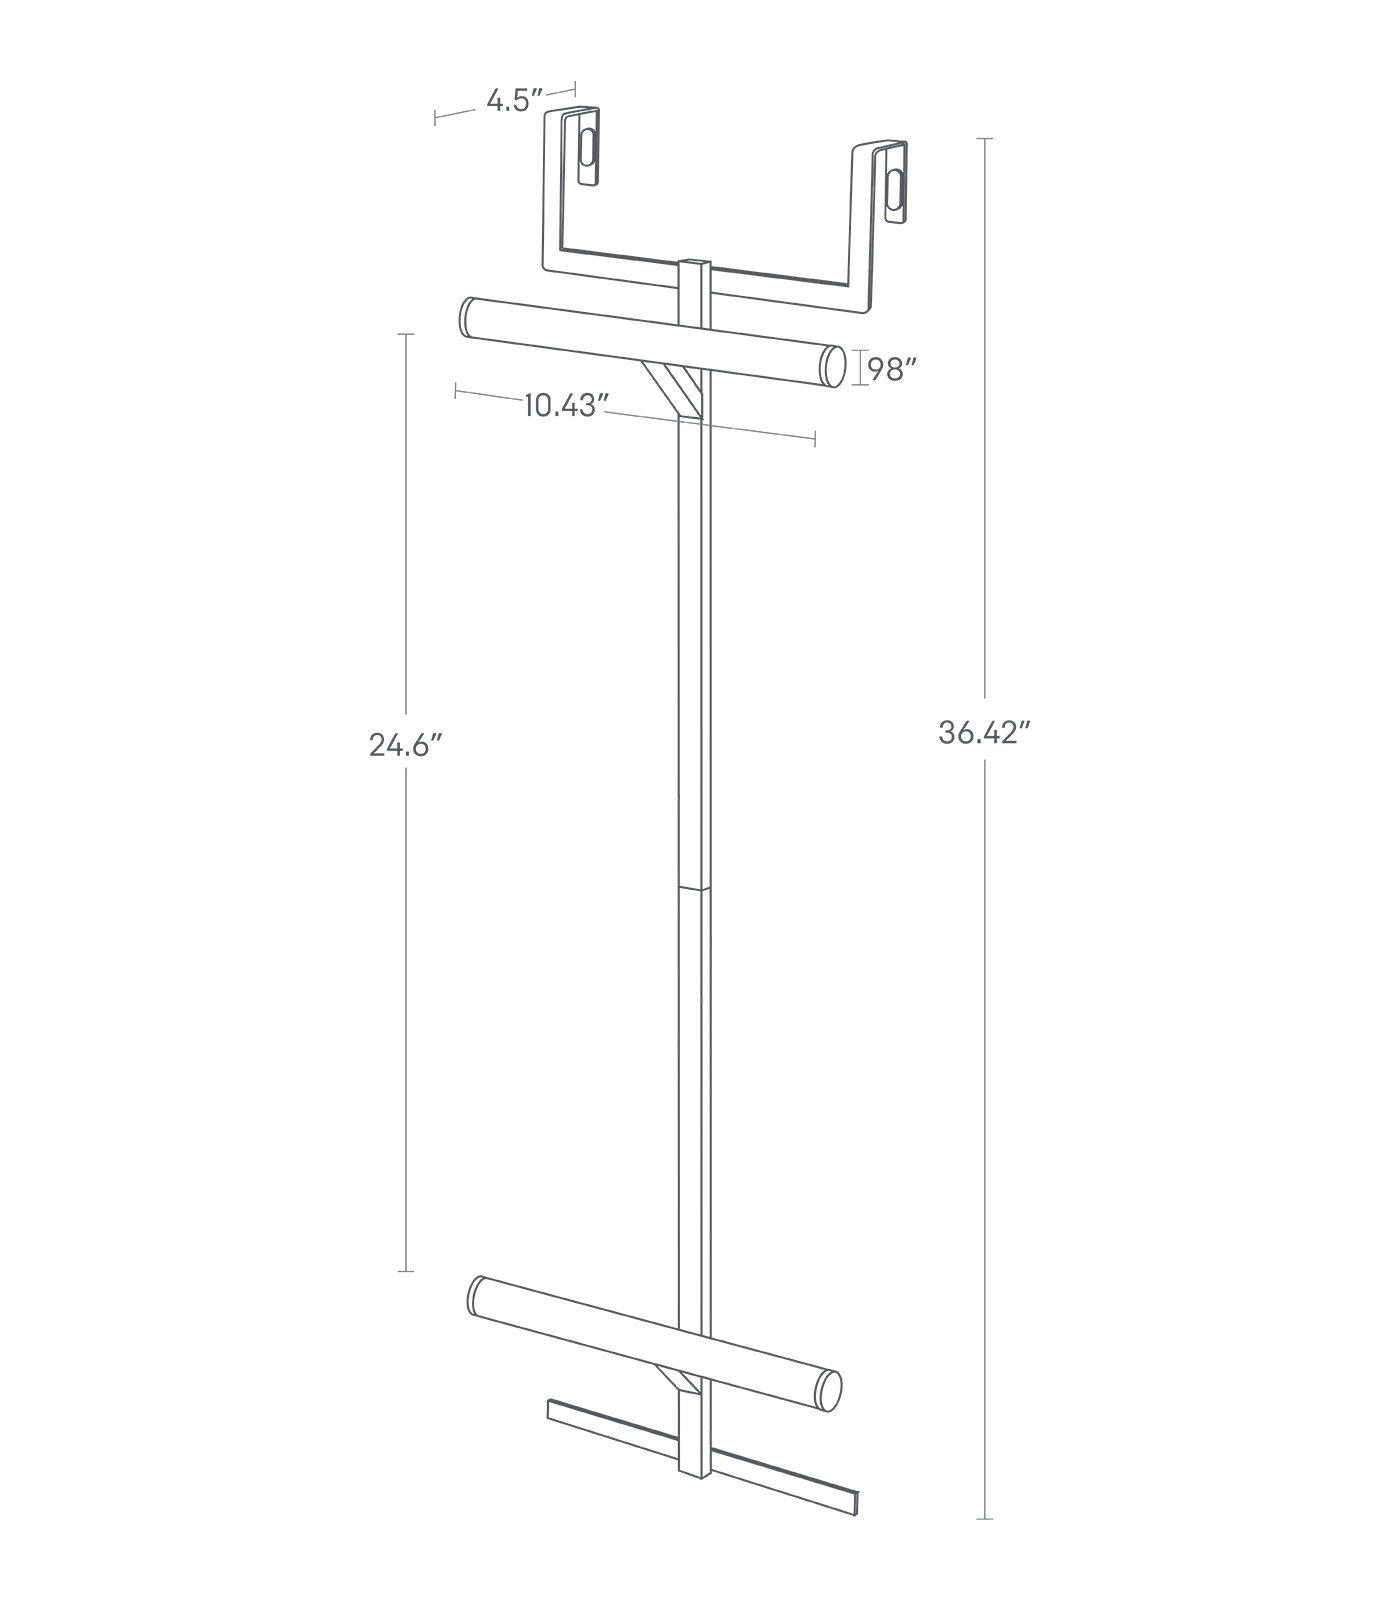 Dimension image for Over-the-Door Backpack Hanger on a white background with a total height of 36.42'', a hanger depth of 4.5'', two 10.43'' long poles for backpack straps with a diameter of 0.98'', and a 24.6'' long pole between the two poles